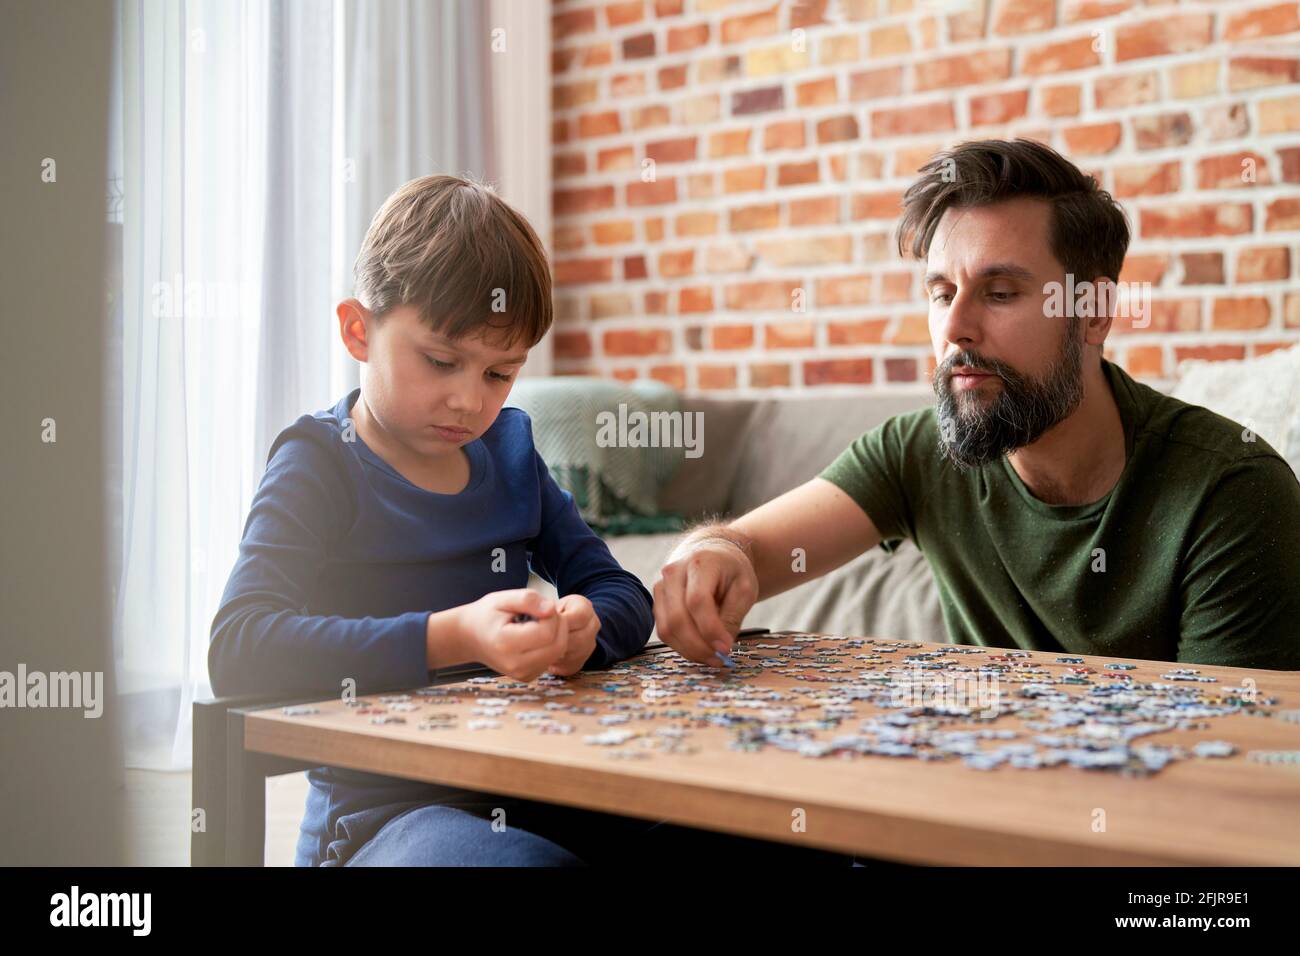 Father and son solving jigsaw puzzle together at home Stock Photo